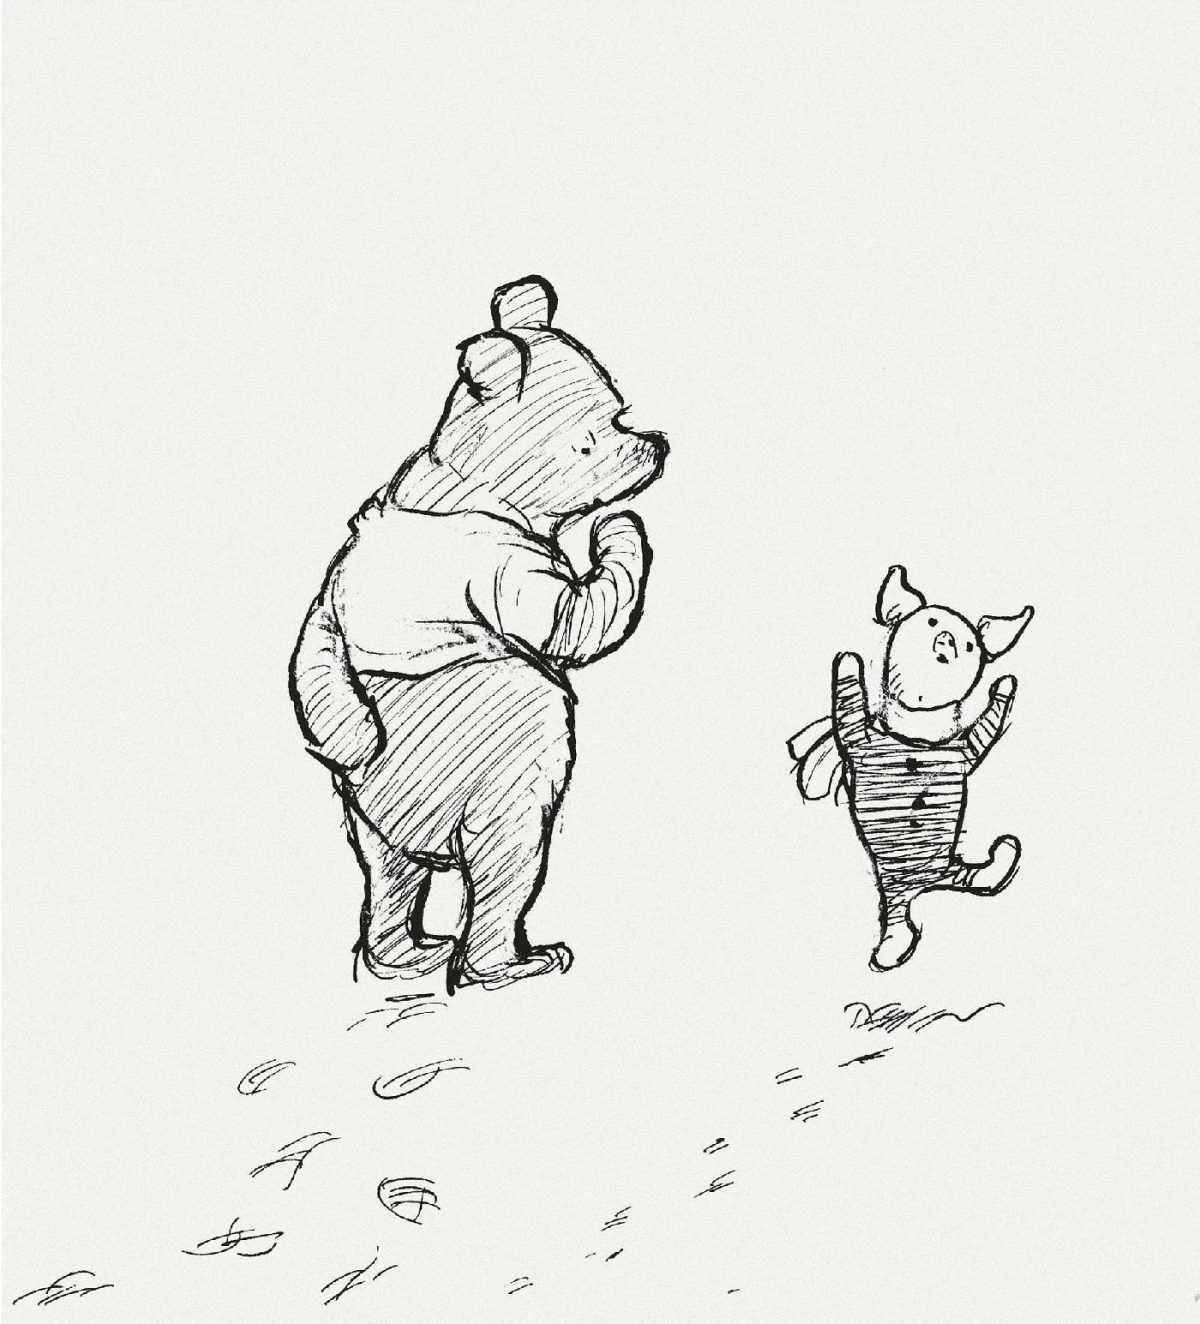 What? said Piglet, with a jump.